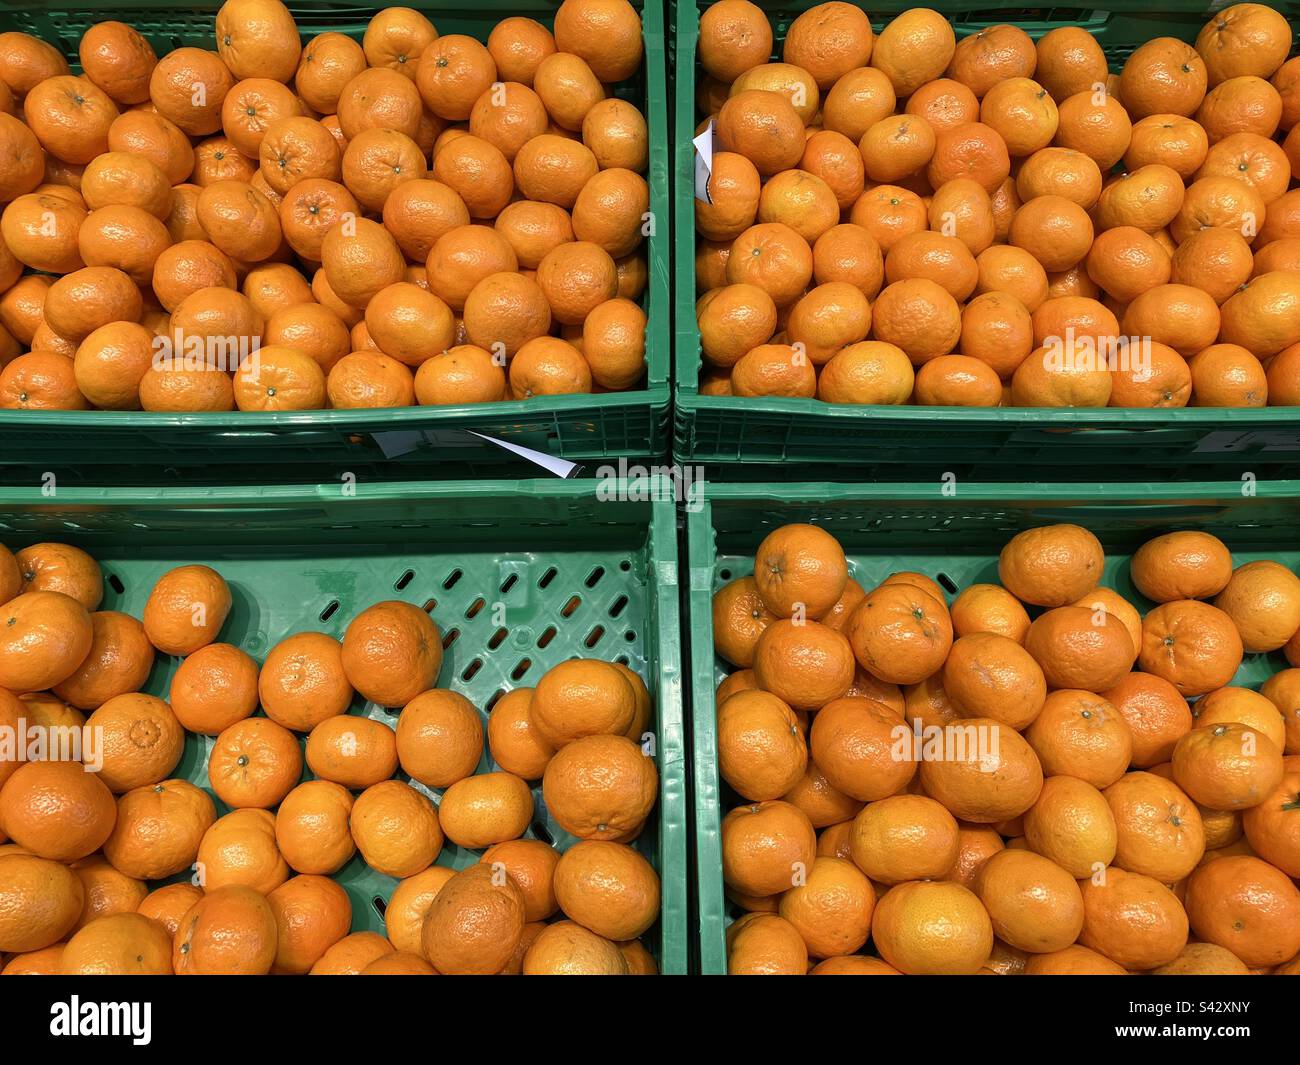 Organic fresh tangerine oranges on display for sale in a supermarket, Alicante Province, Spain Stock Photo